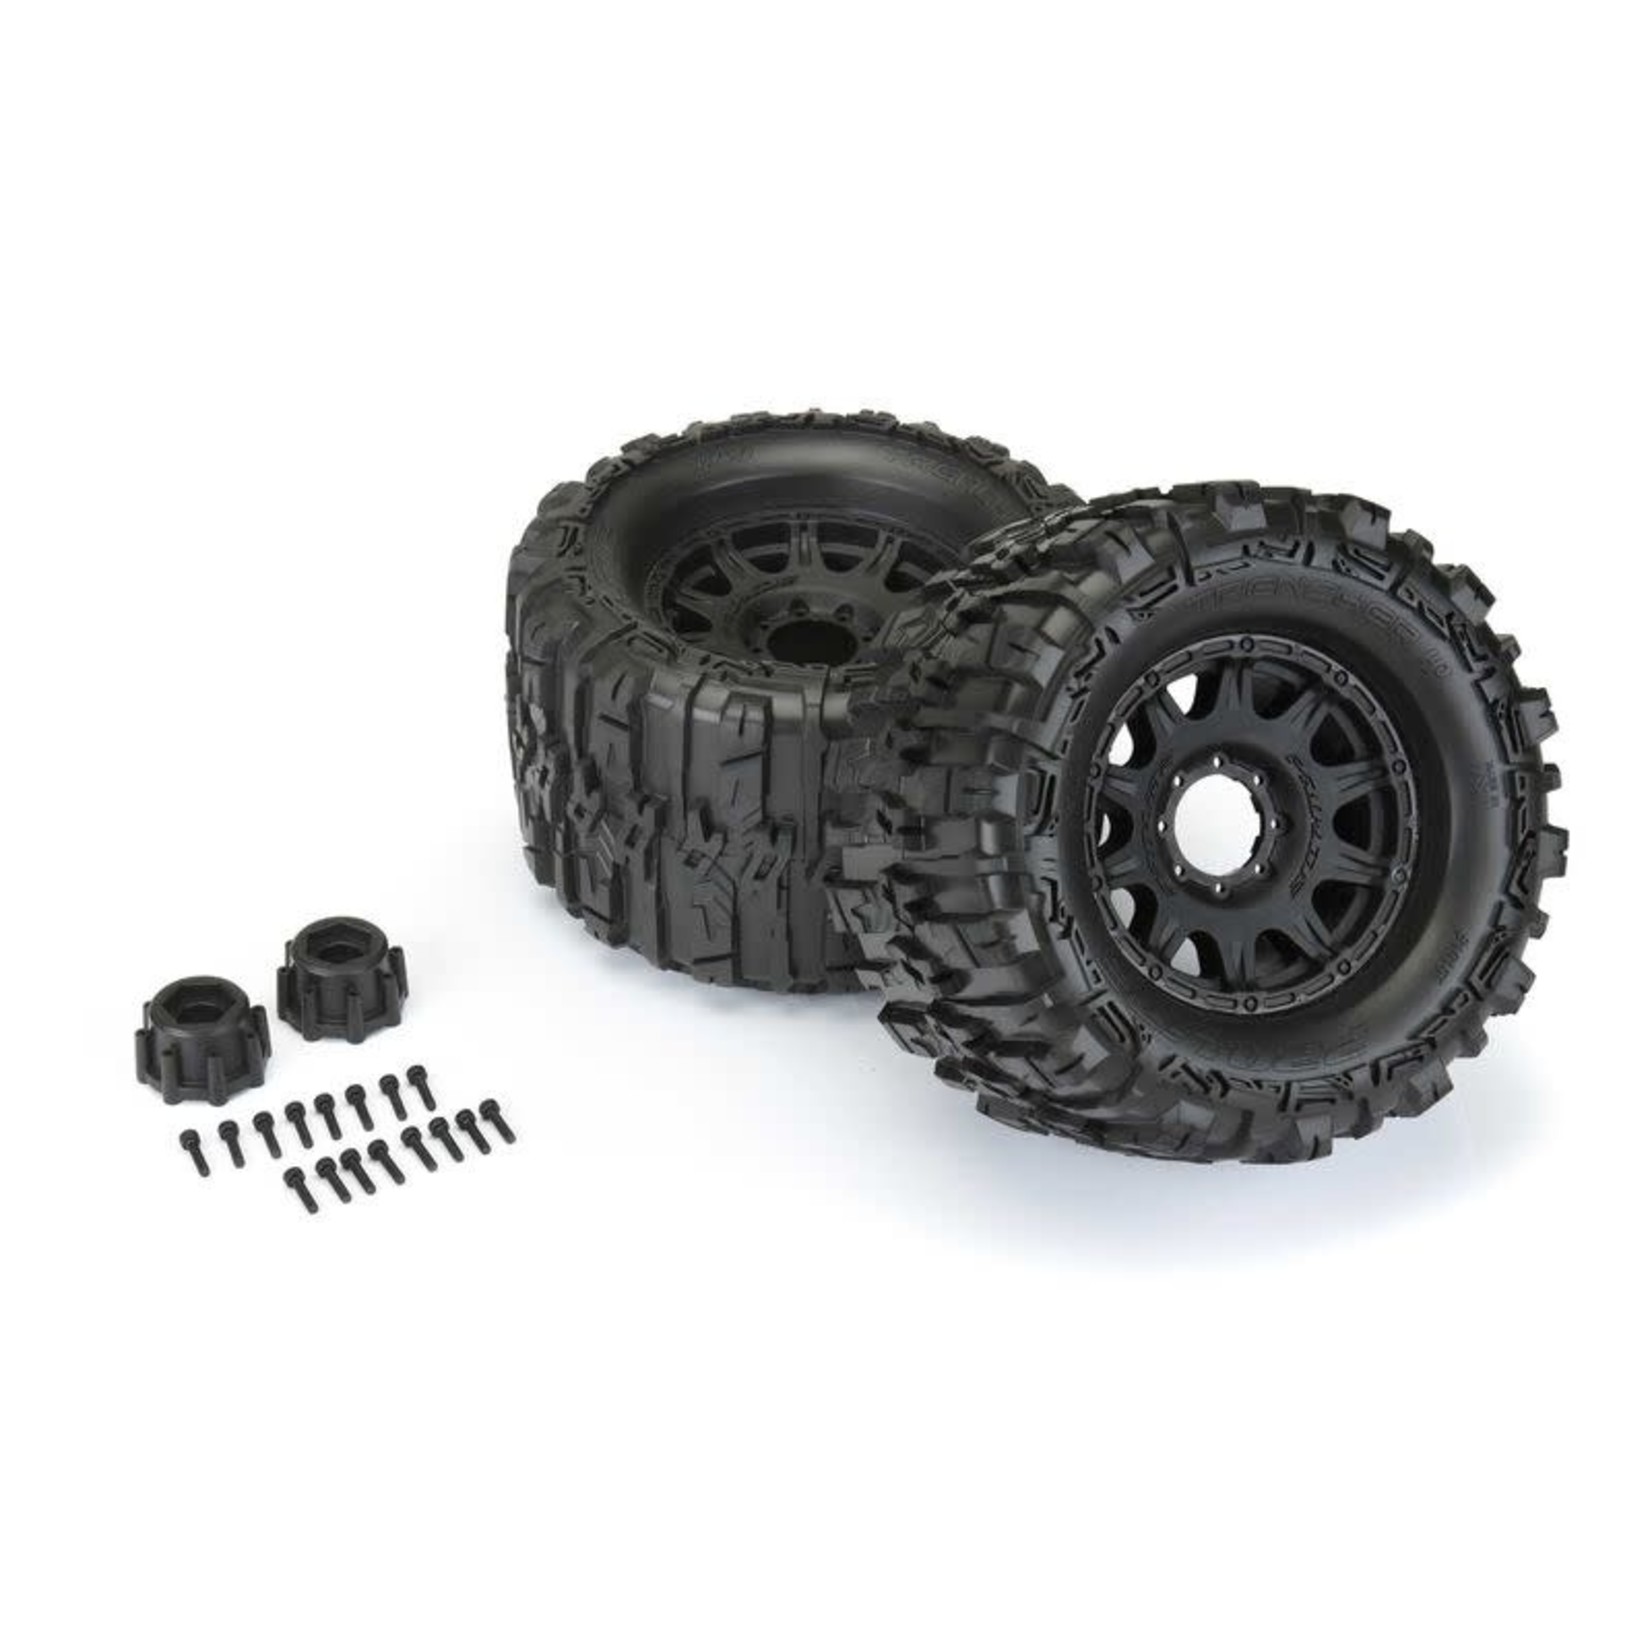 Pro-line Racing PRO1015510 Pro-Line 1/8 Trencher HP BELTED F/R 3.8" MT Tires Mounted 17mm Black  Raid (2)